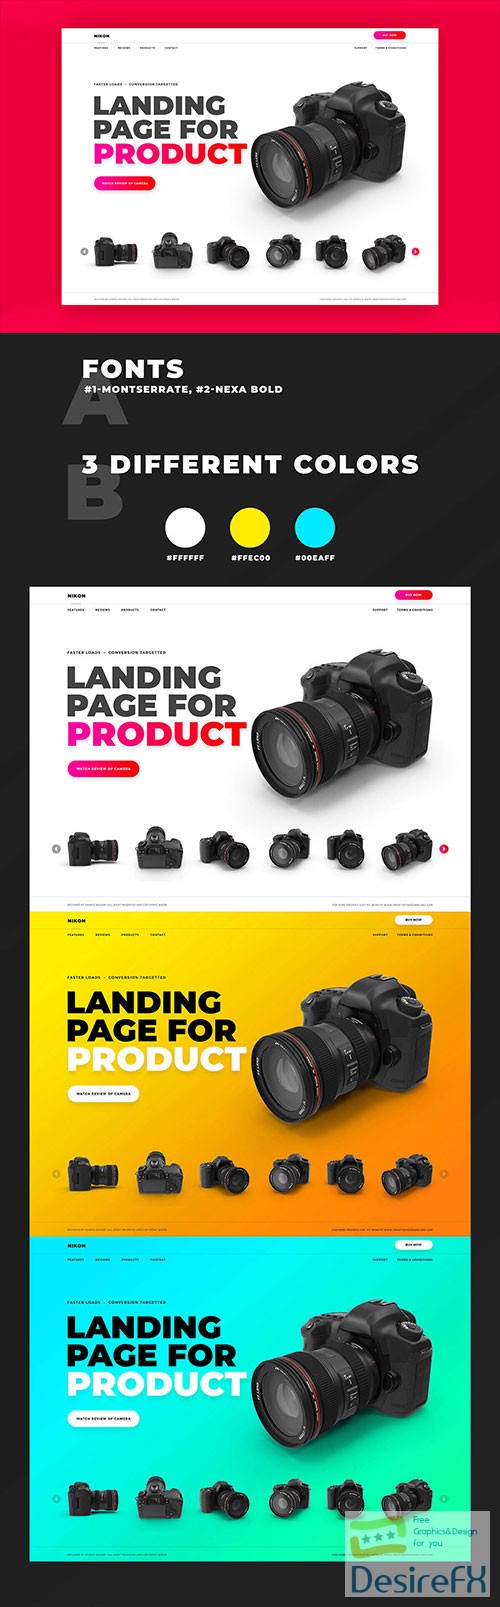 Product Landing Page Website PSD